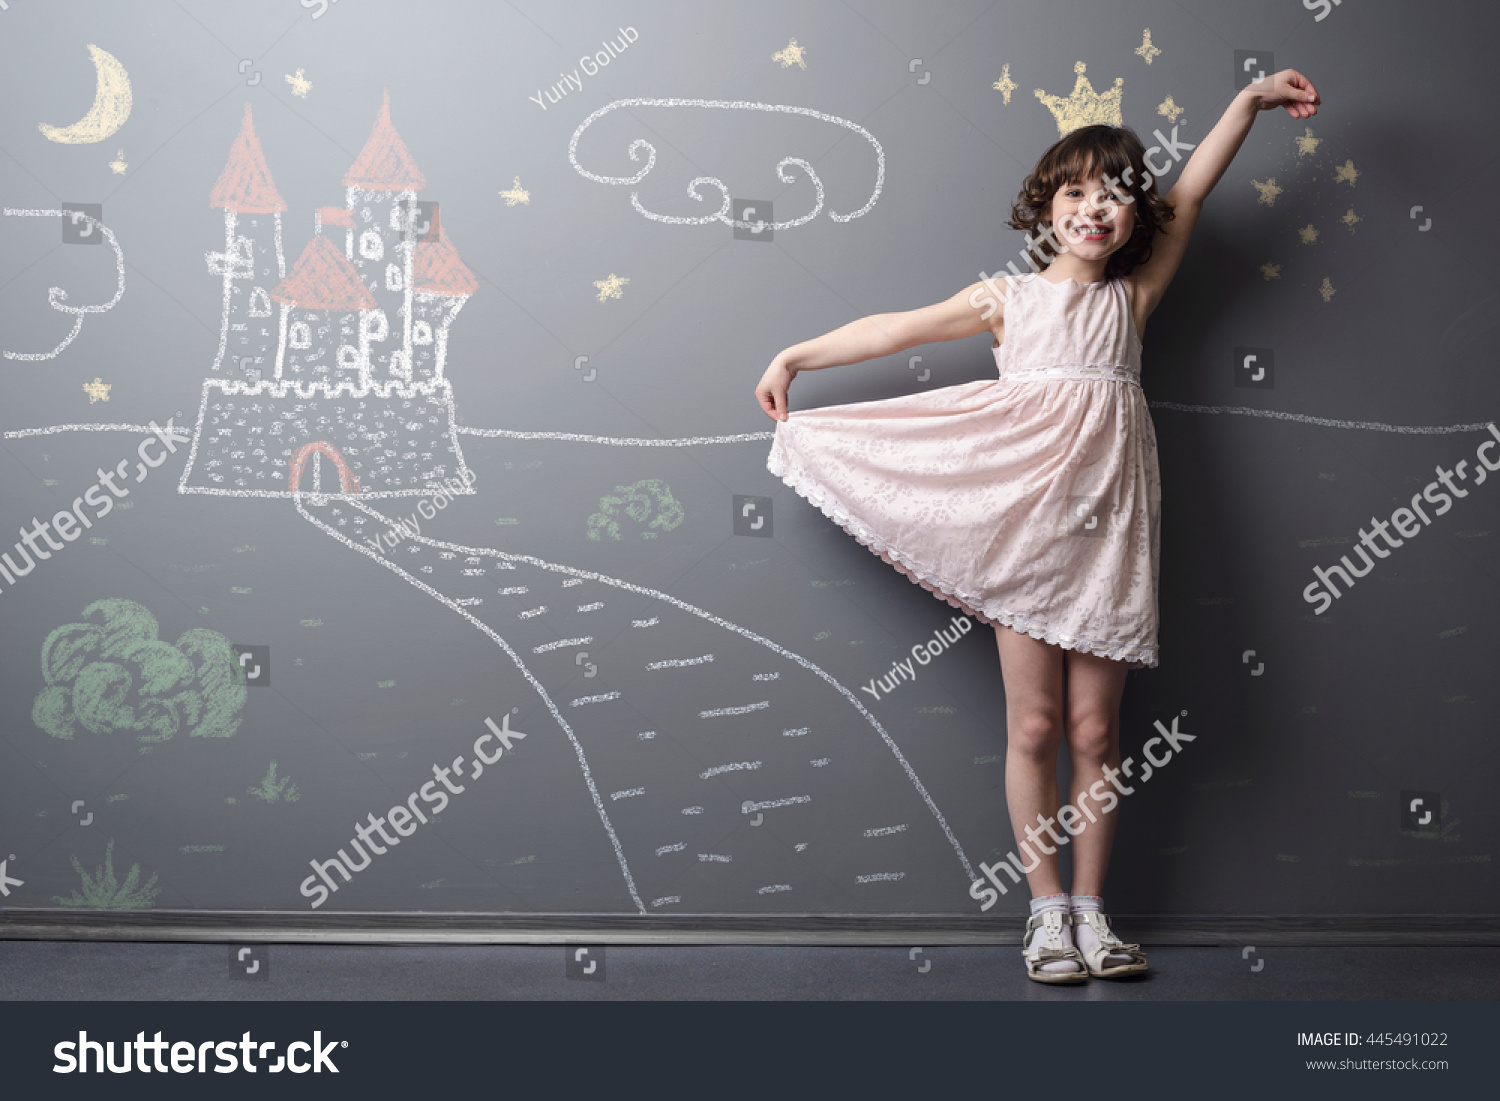 Little princess near her castle smiles and holds her dress with hand. Depicted road, crown and stars on the neutral background. True emotion of happiness of the child. #445491022